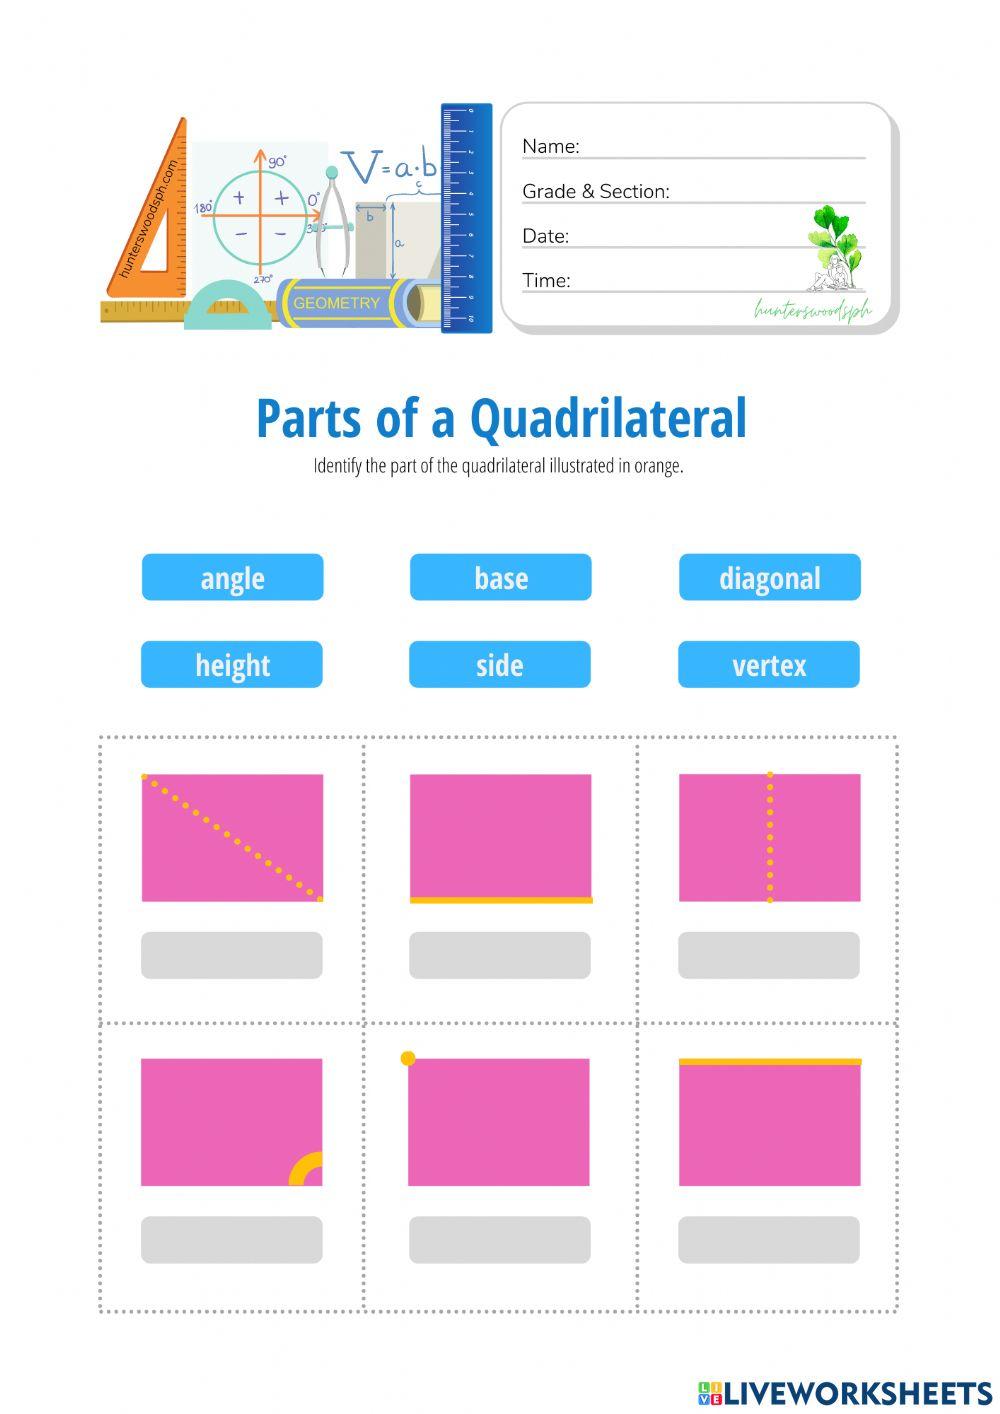 Parts of a Quadrilateral